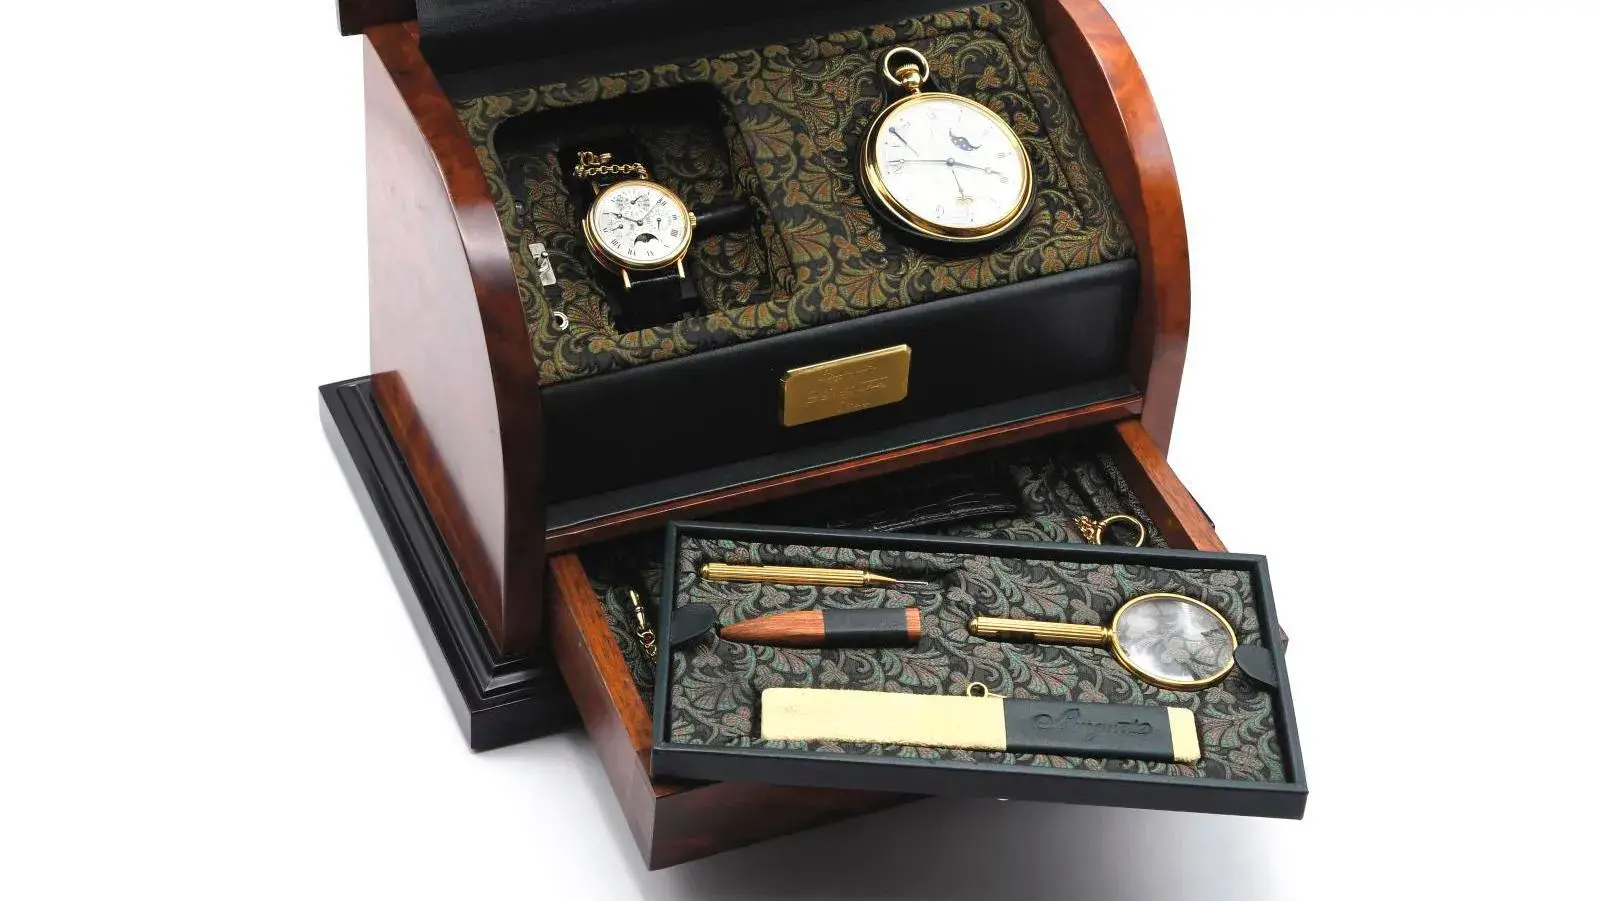 Breguet, Breguet subscription box, c. 1991, no. 44, hazelnut root, upholstered with a leafy pattern and covered with green leather, containing a yellow gold astronomical perpetual pocket watch (diam. 6.2 cm/2.44 in) and a yellow gold perpetual calendar wristwatch with a minute repeater (diam. 3.7 cm/1.45 in). Estimate: €180,000/250,000